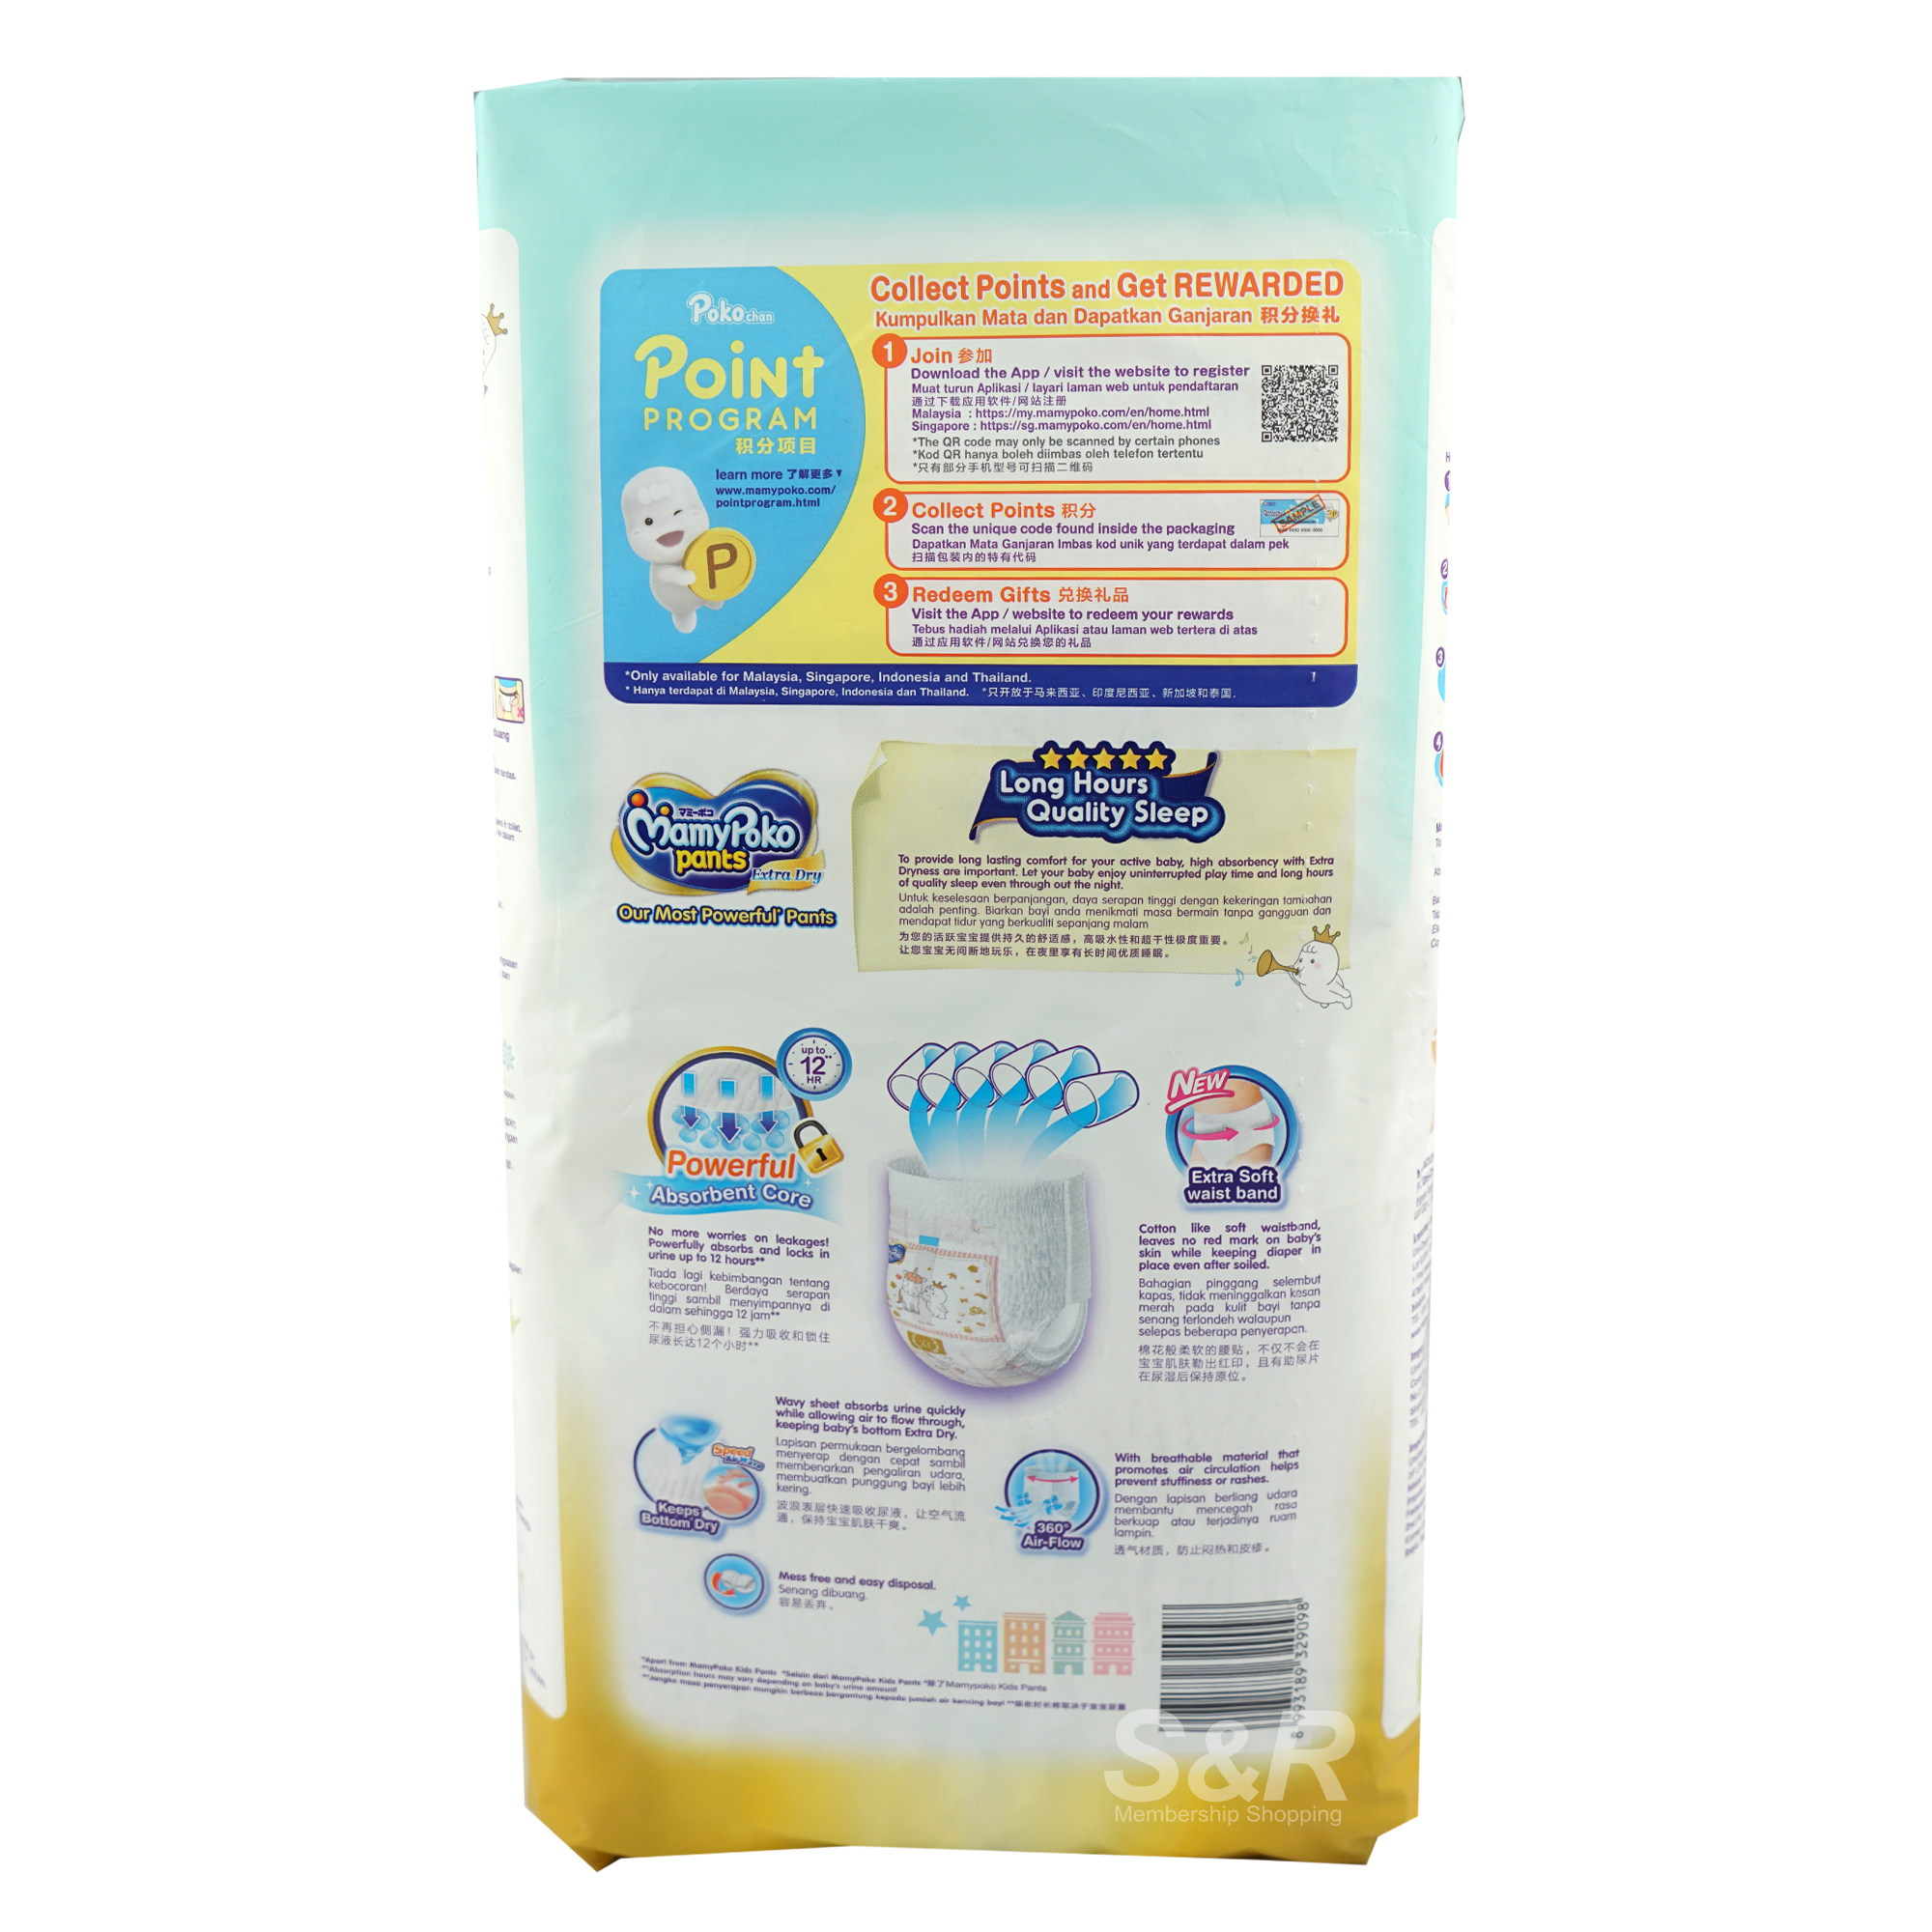 Pants Extra Dry Extra Larged-sized Disposable Baby Diapers